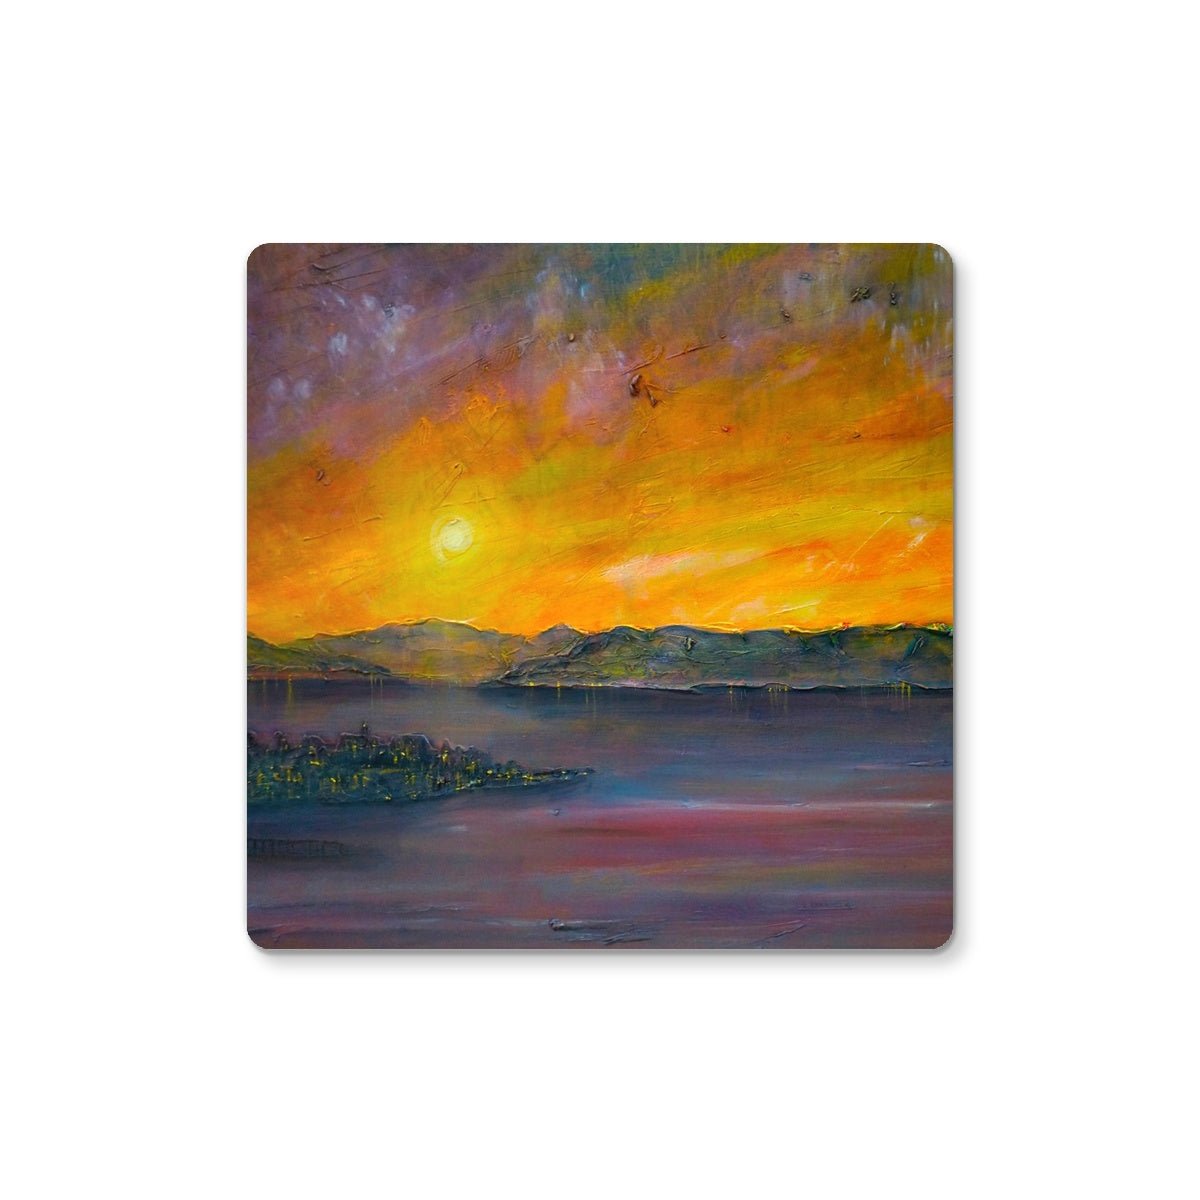 Sunset Over Gourock Art Gifts Coaster-Coasters-River Clyde Art Gallery-6 Coasters-Paintings, Prints, Homeware, Art Gifts From Scotland By Scottish Artist Kevin Hunter